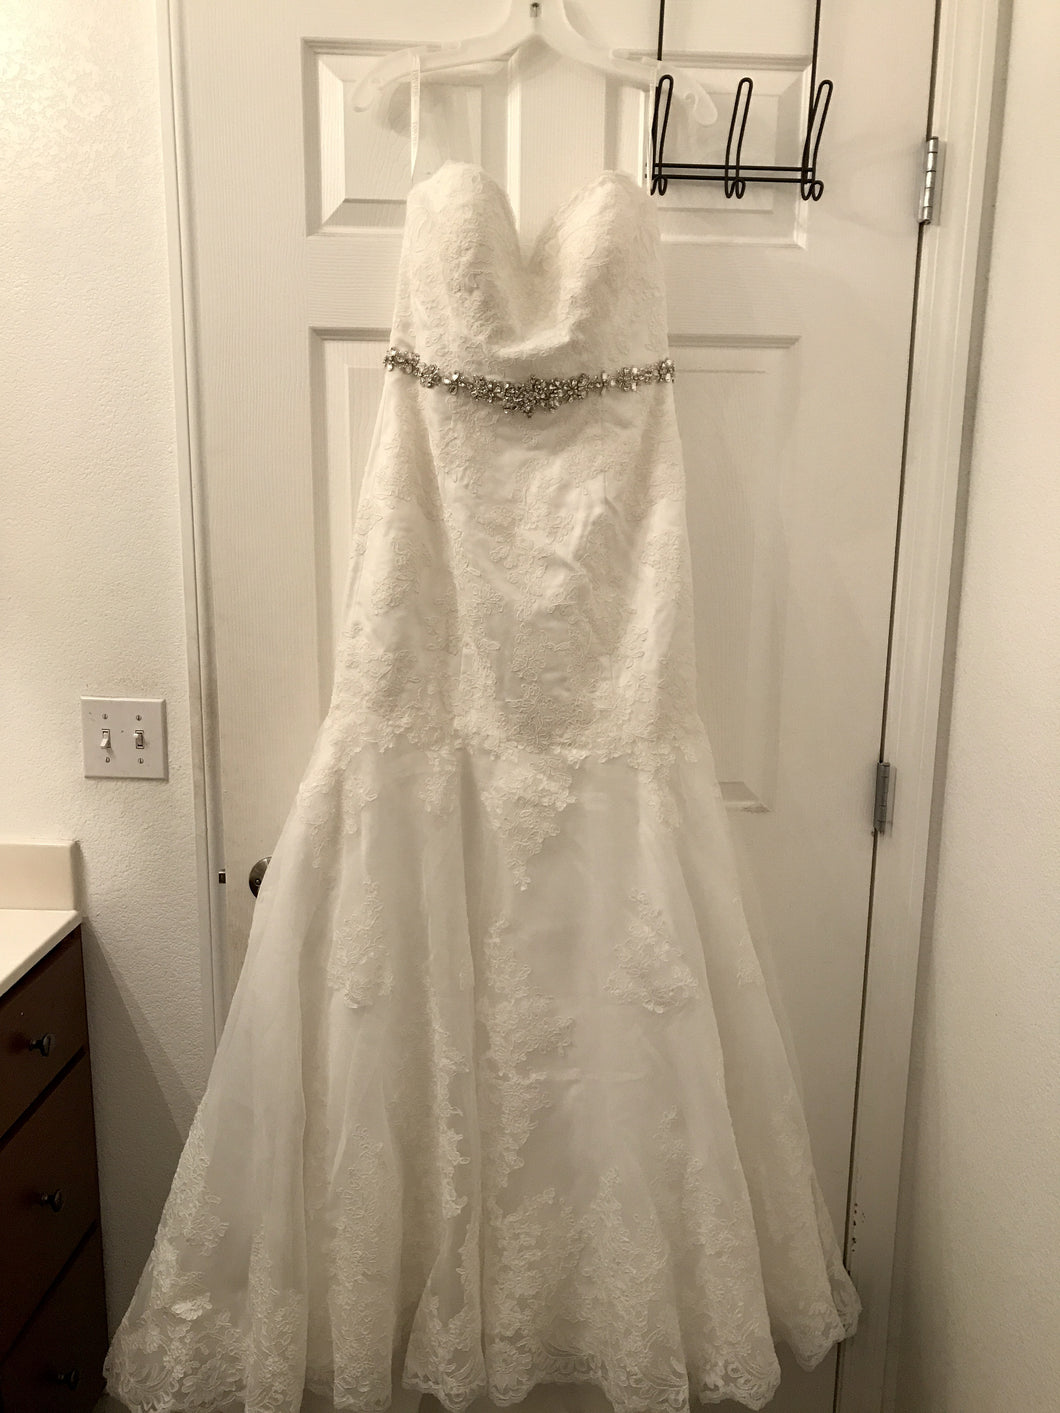 David's Bridal 'Sweetheart Trumpet' size 10 new wedding dress front view on hanger